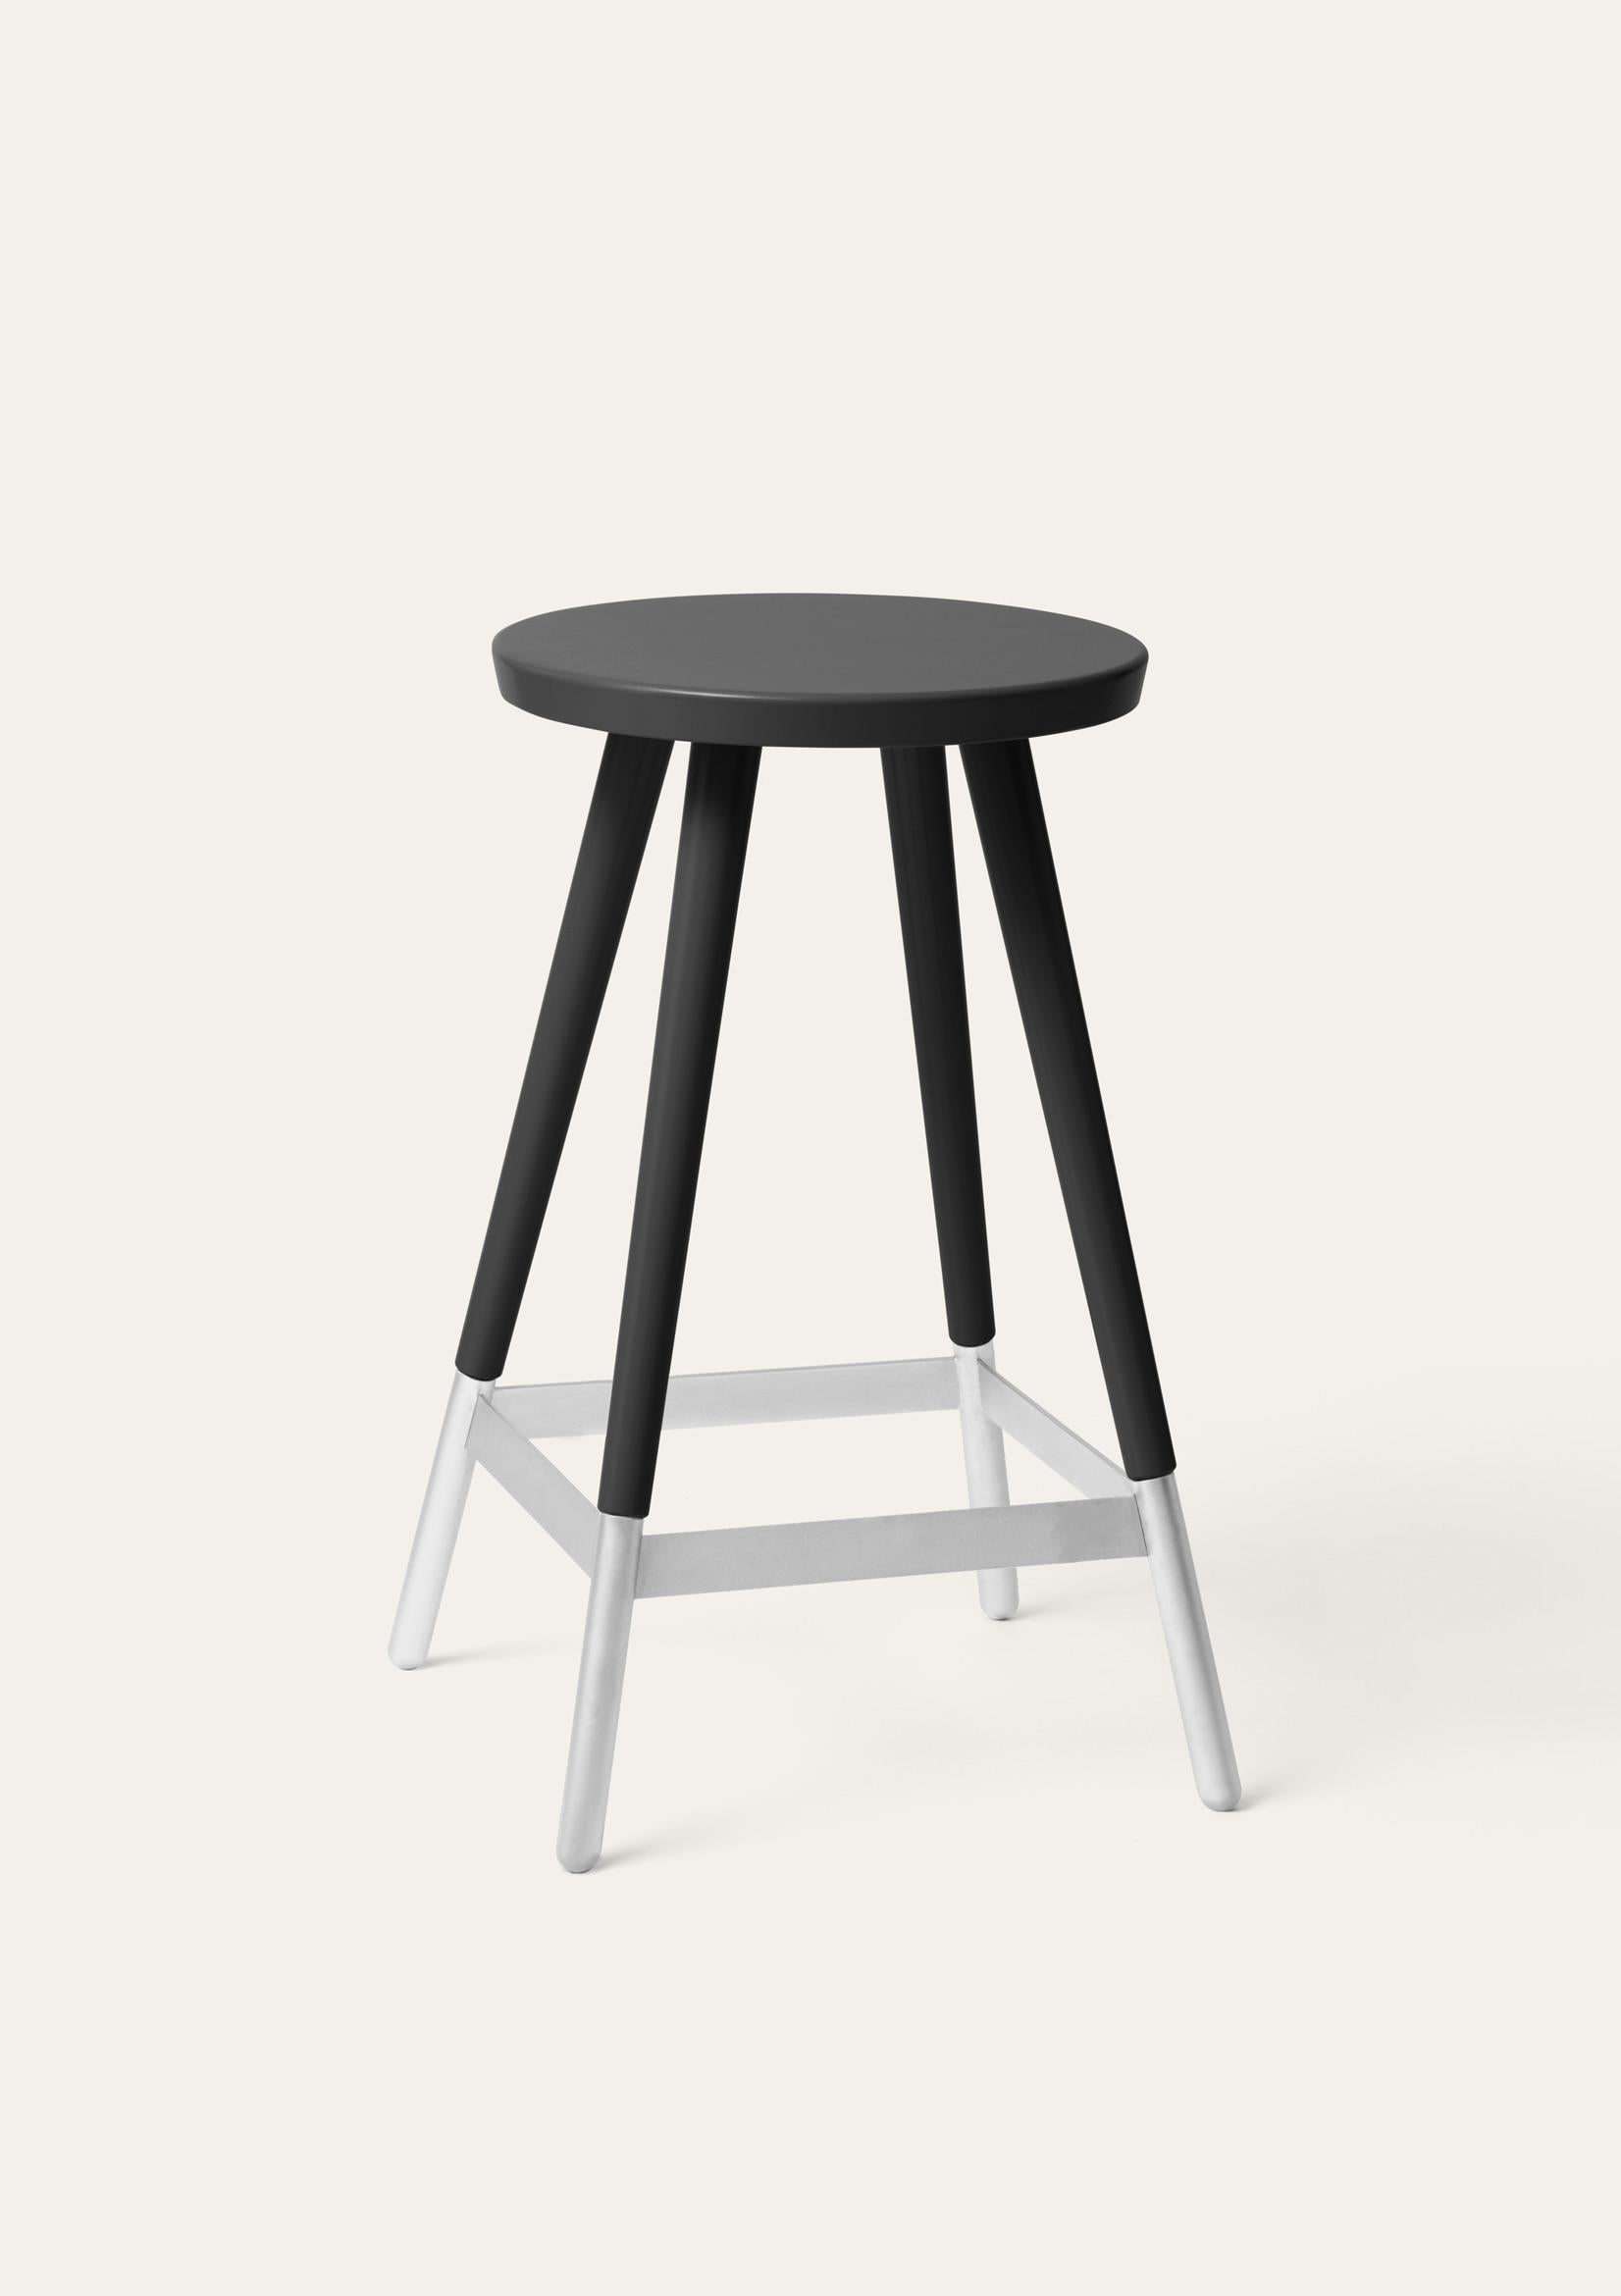 Black Tupp stool by Storängen Design
Dimensions: D 41 x W 41 x H 65 cm
Materials: birch wood, nickel plated steel.
Also available in other colors and with backrest.

Give the bar some character! Tupp is avaliable in two heights, both with and